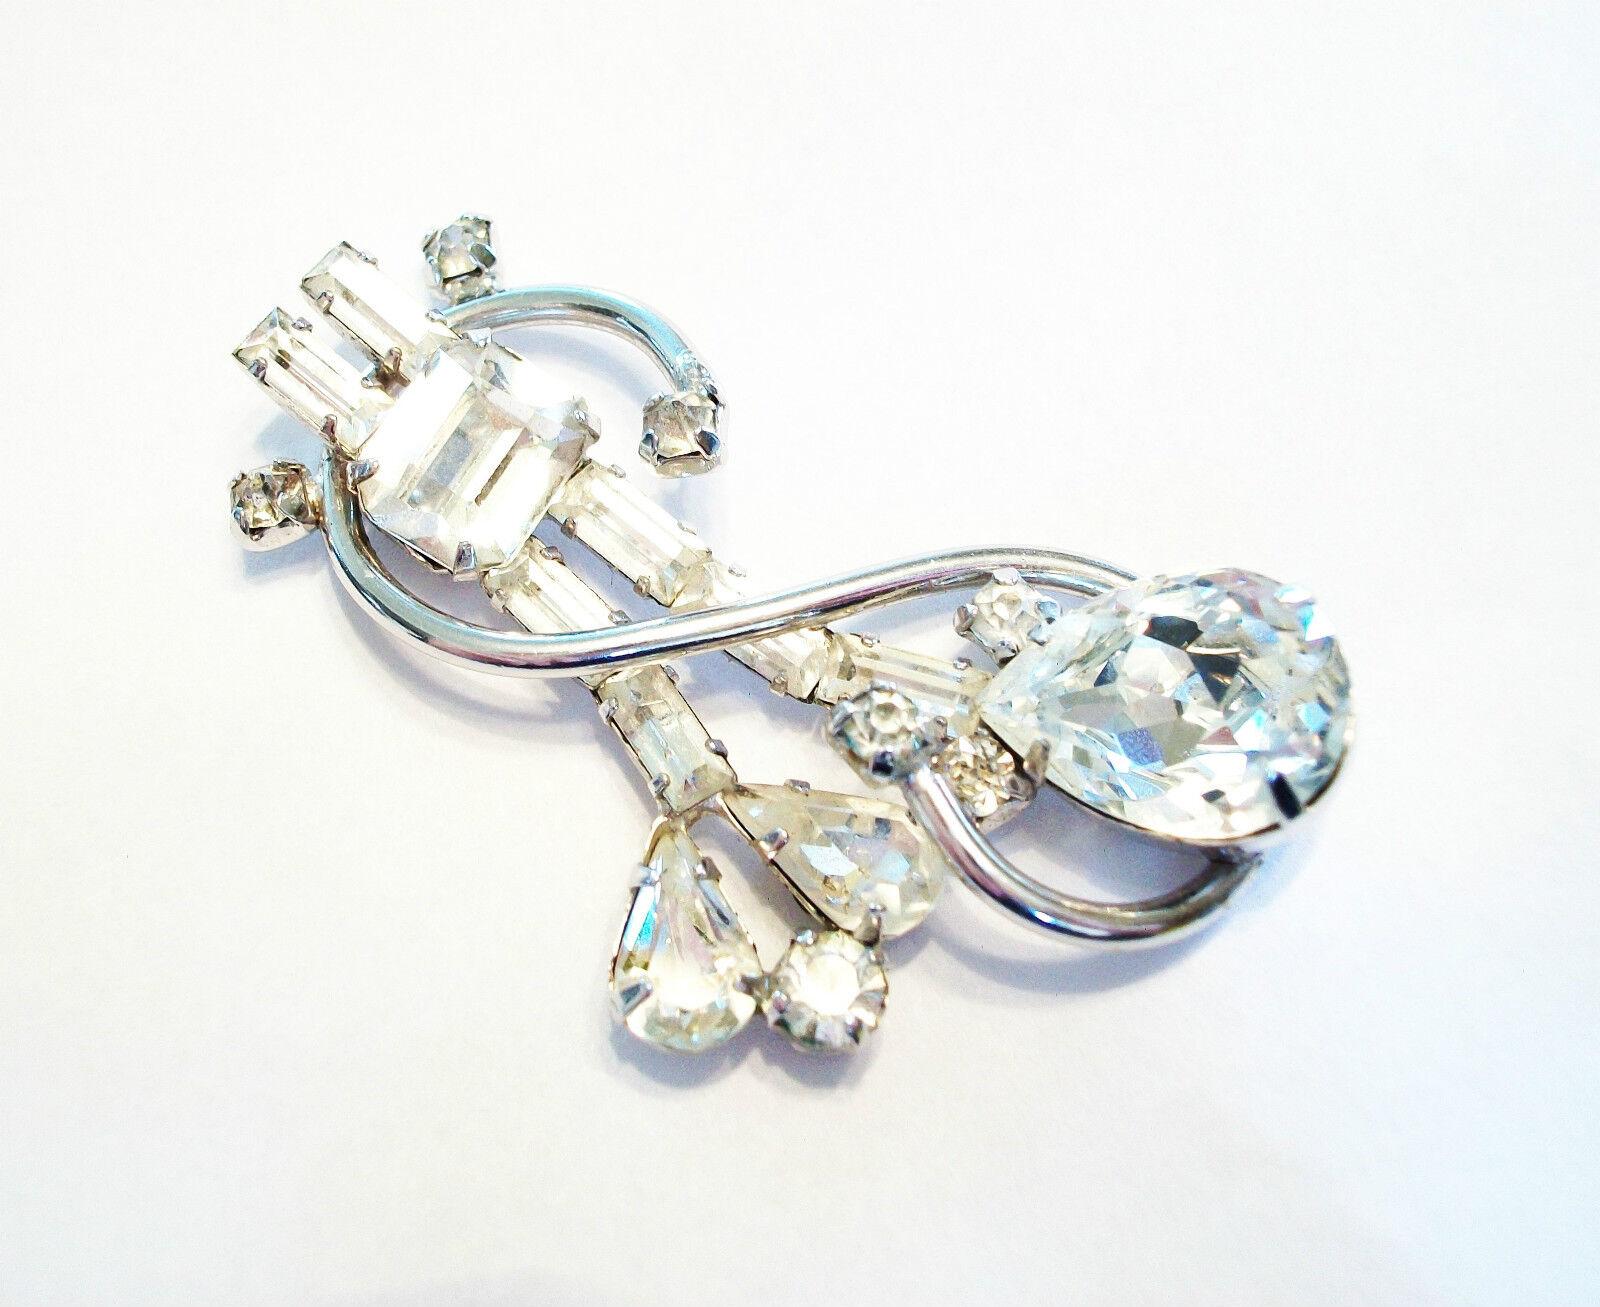 JAY FLEX - Vintage fine quality retro style sterling silver and rhinestone brooch - signed verso - Canada - circa 1950's.

Good vintage condition - no loss - no damage - no repairs - surface scratches with minor signs of age and use - ready to